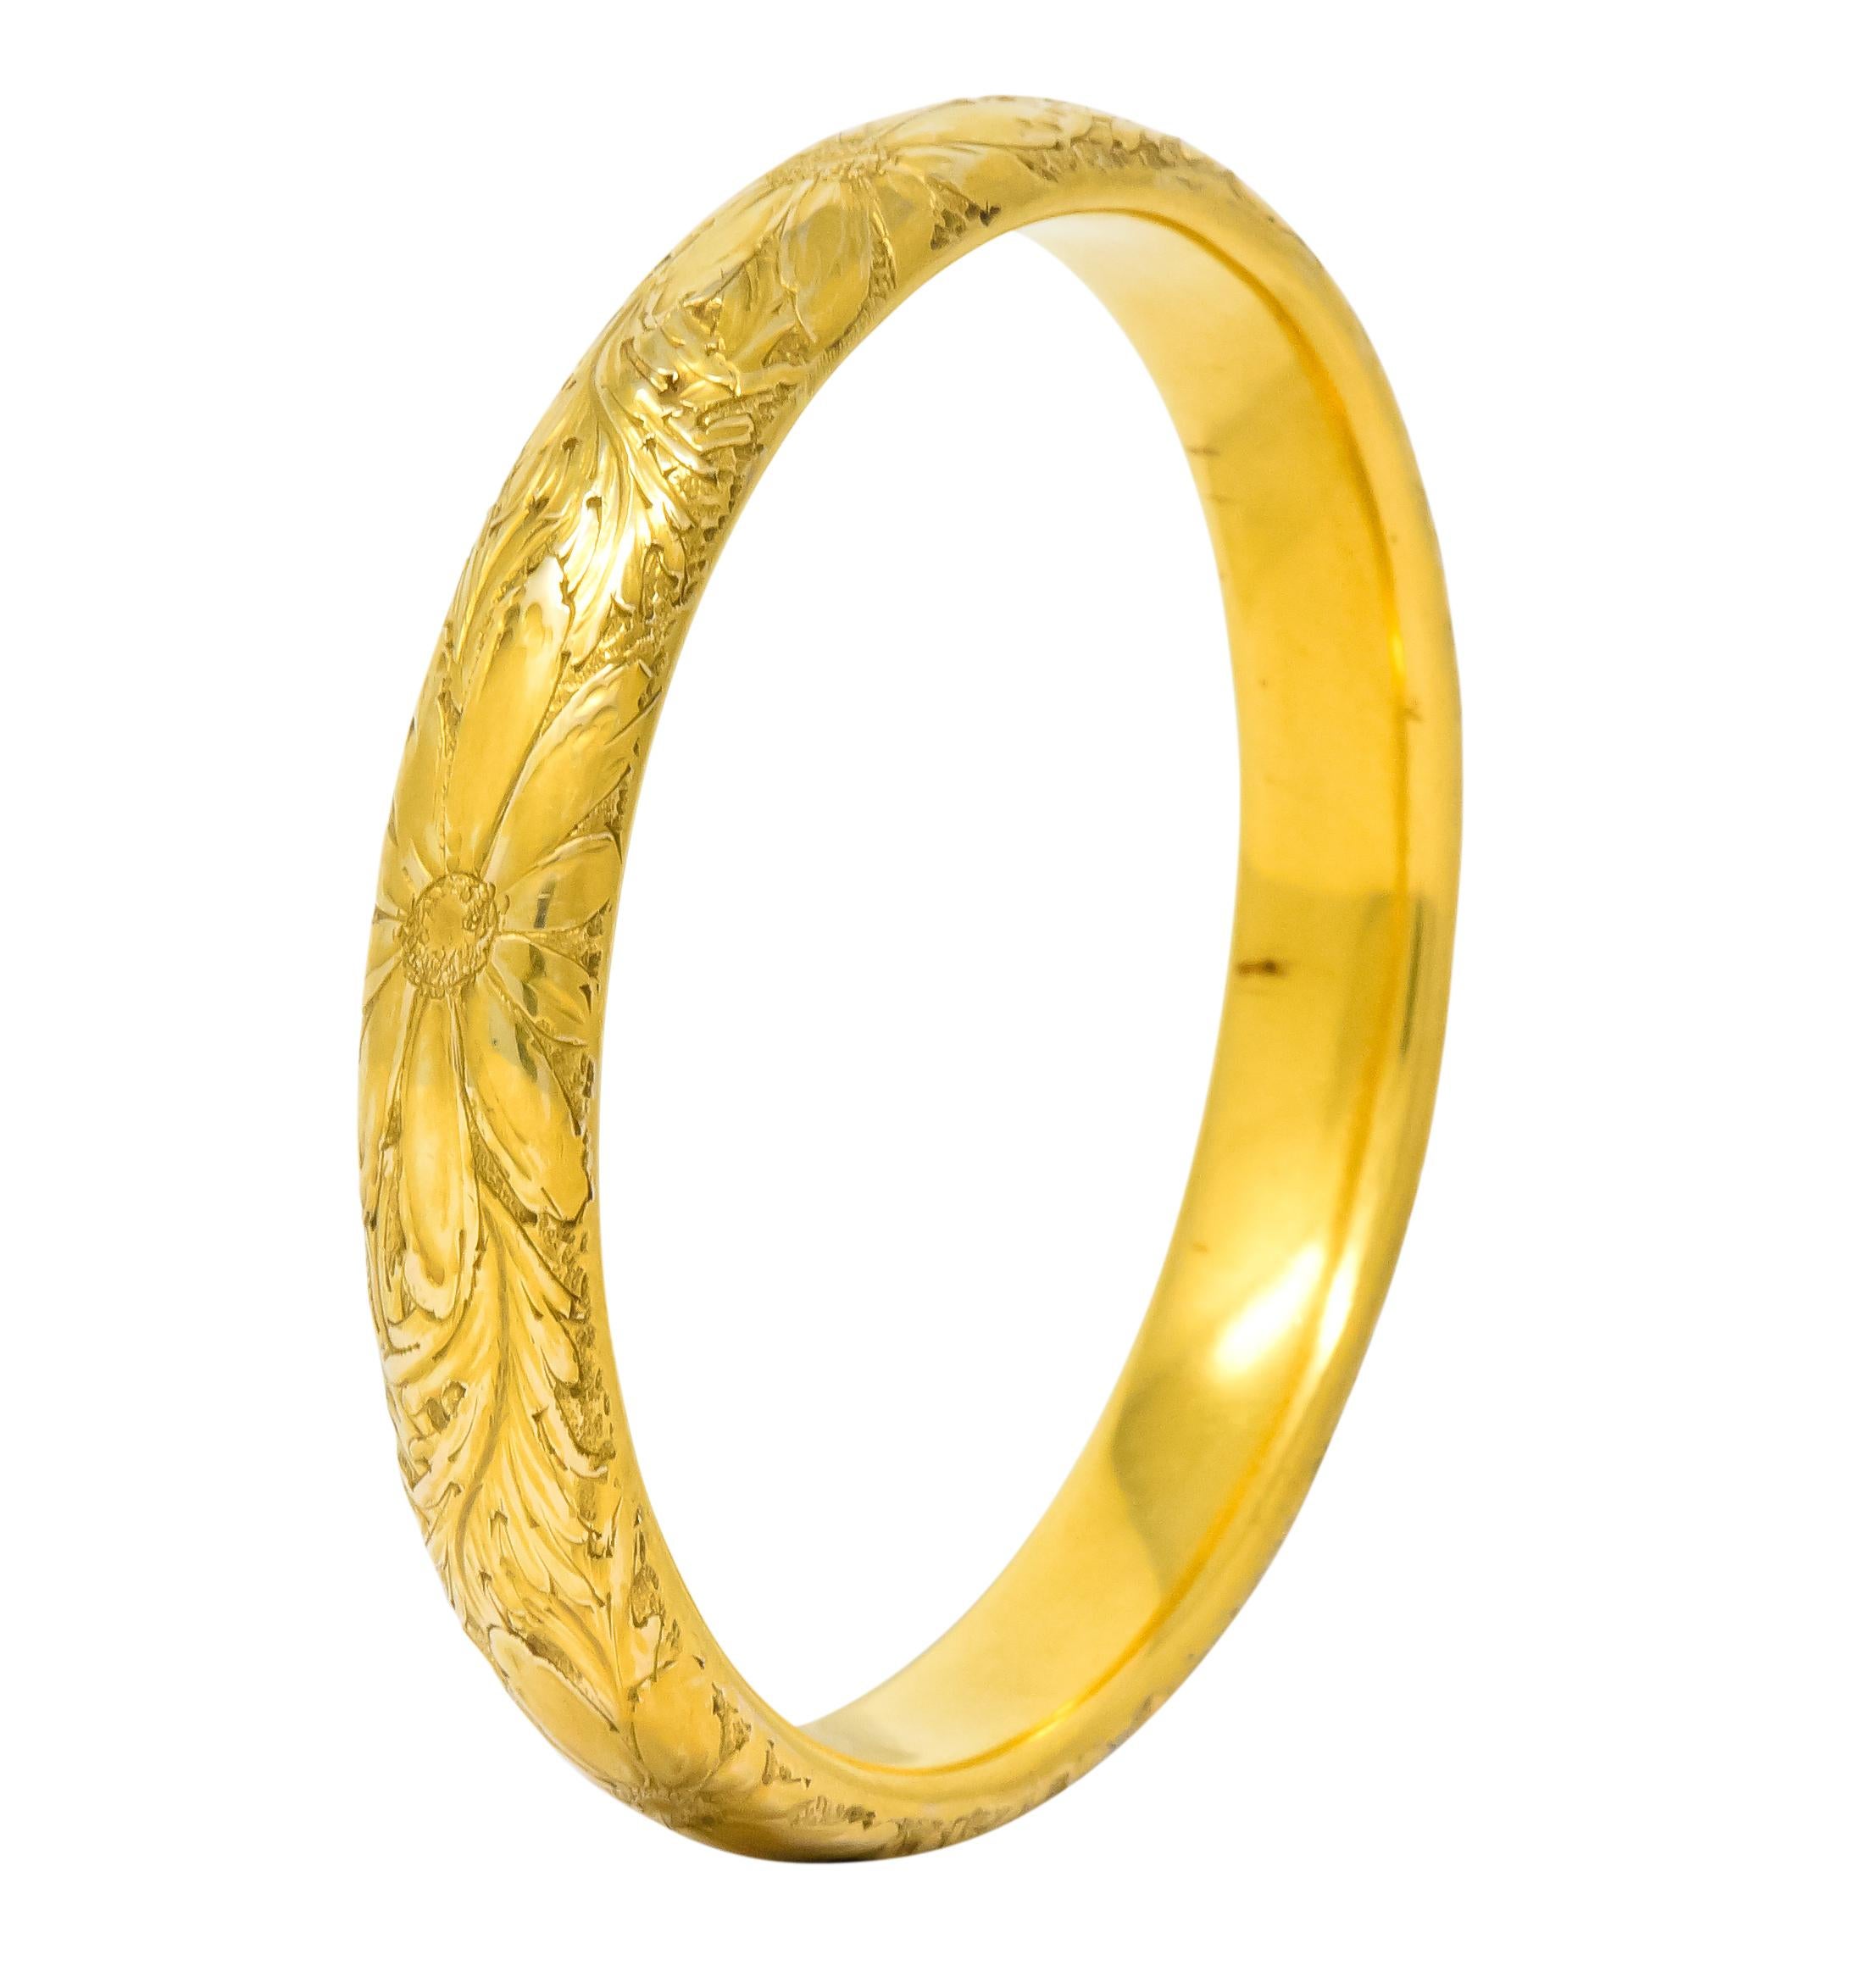 Hollow gold bangle bracelet with hand engraved flower and foliate detail all the way around

With maker's mark for Sloan & Co.

Stamped 14 for 14 karat gold

Inner circumference: 7 1/2 inches

Width: 1/2 inch

Total weight: 17.6 grams

Blossoming.